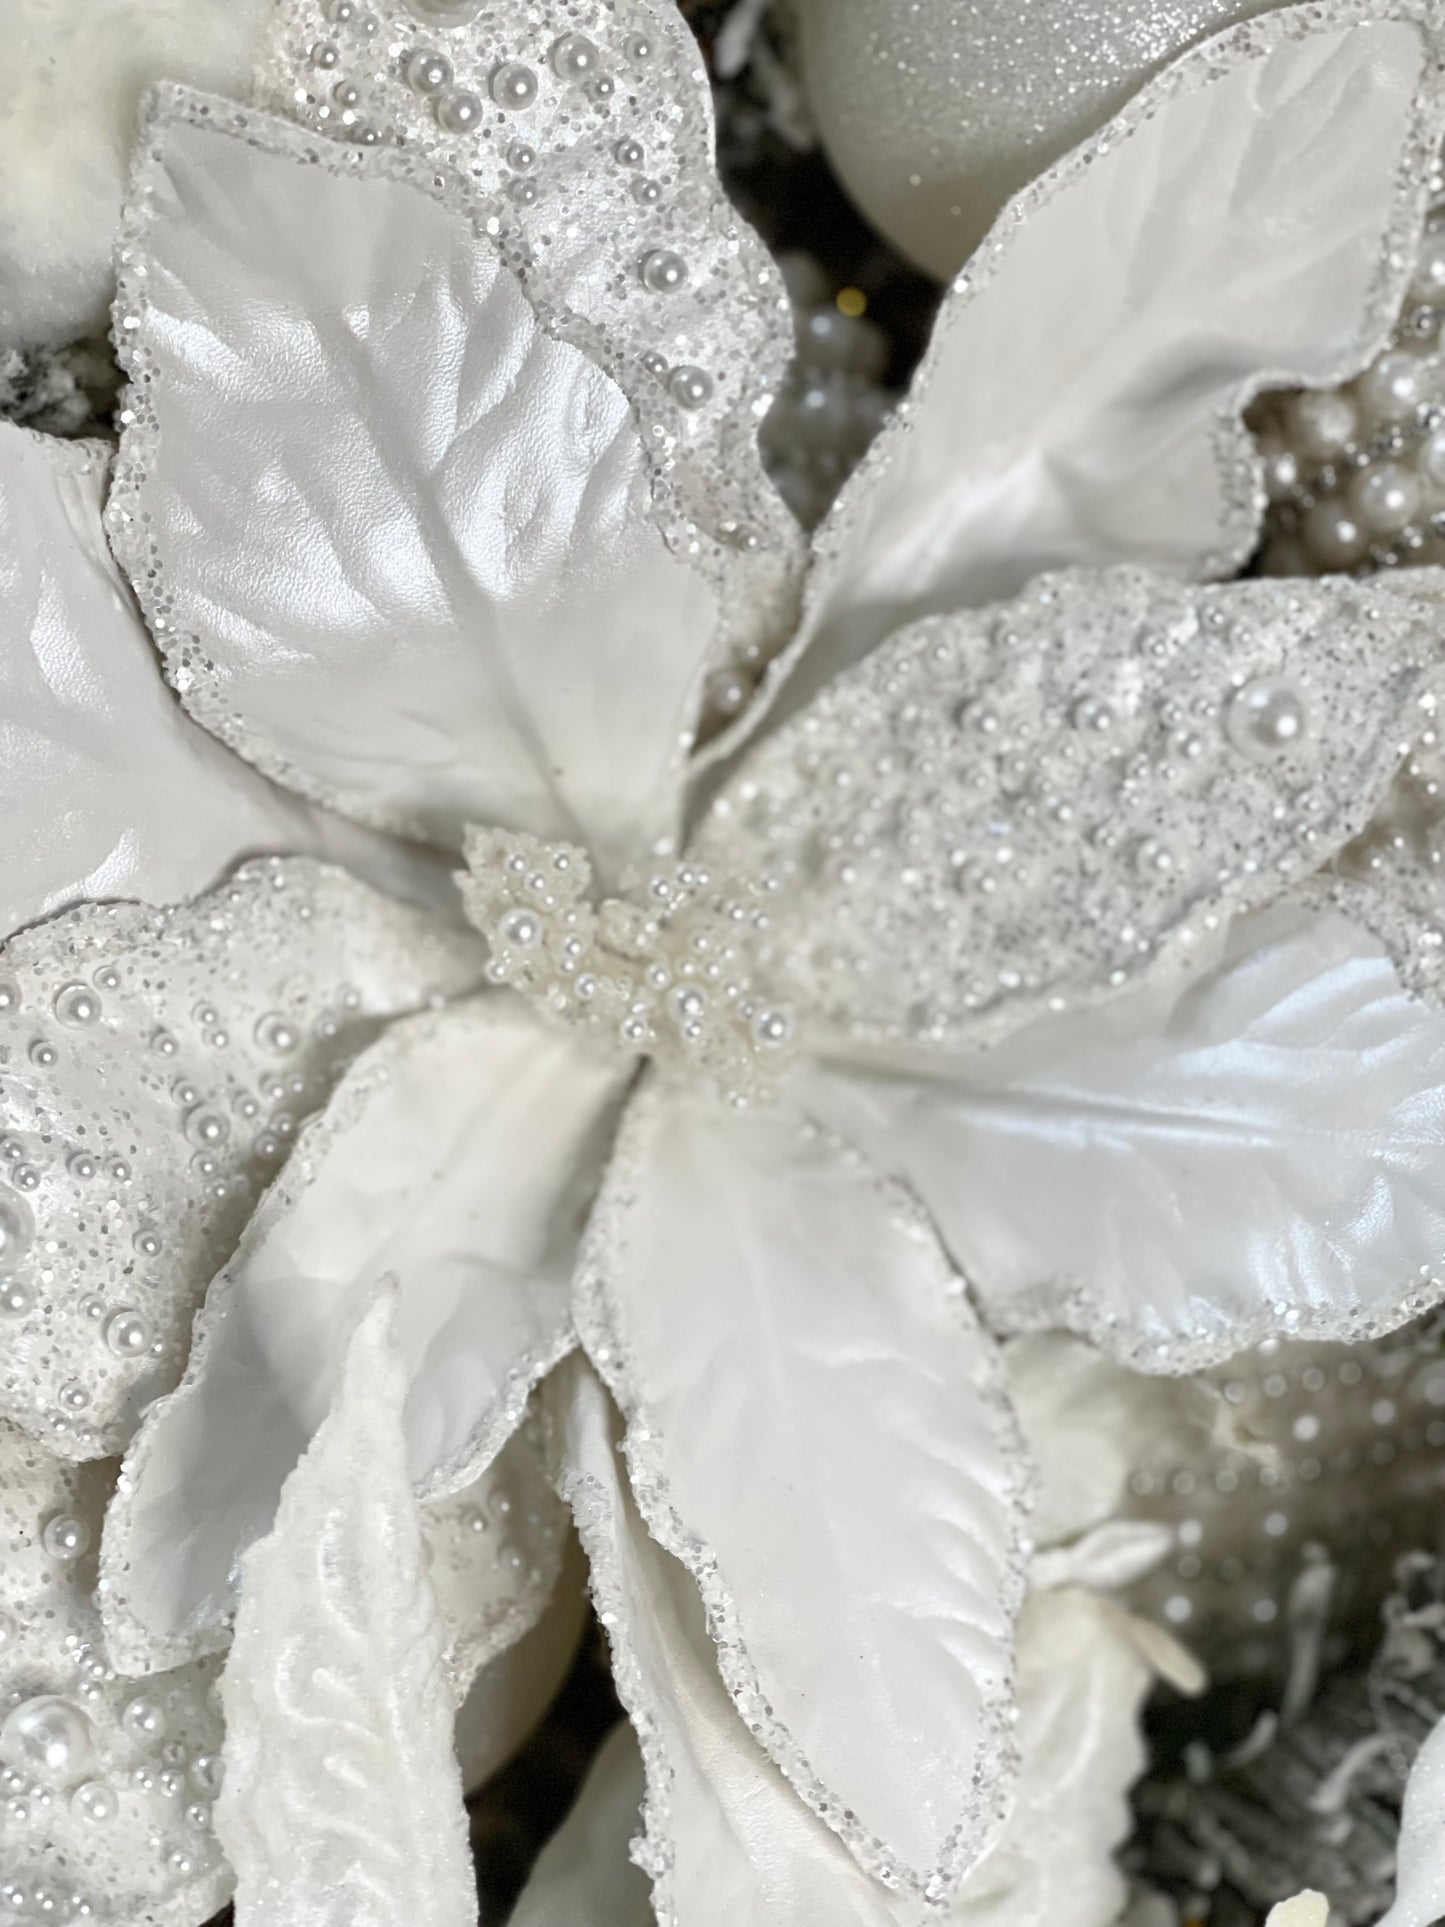 Sparkling White Poinsettia with Pearls, Set of 5